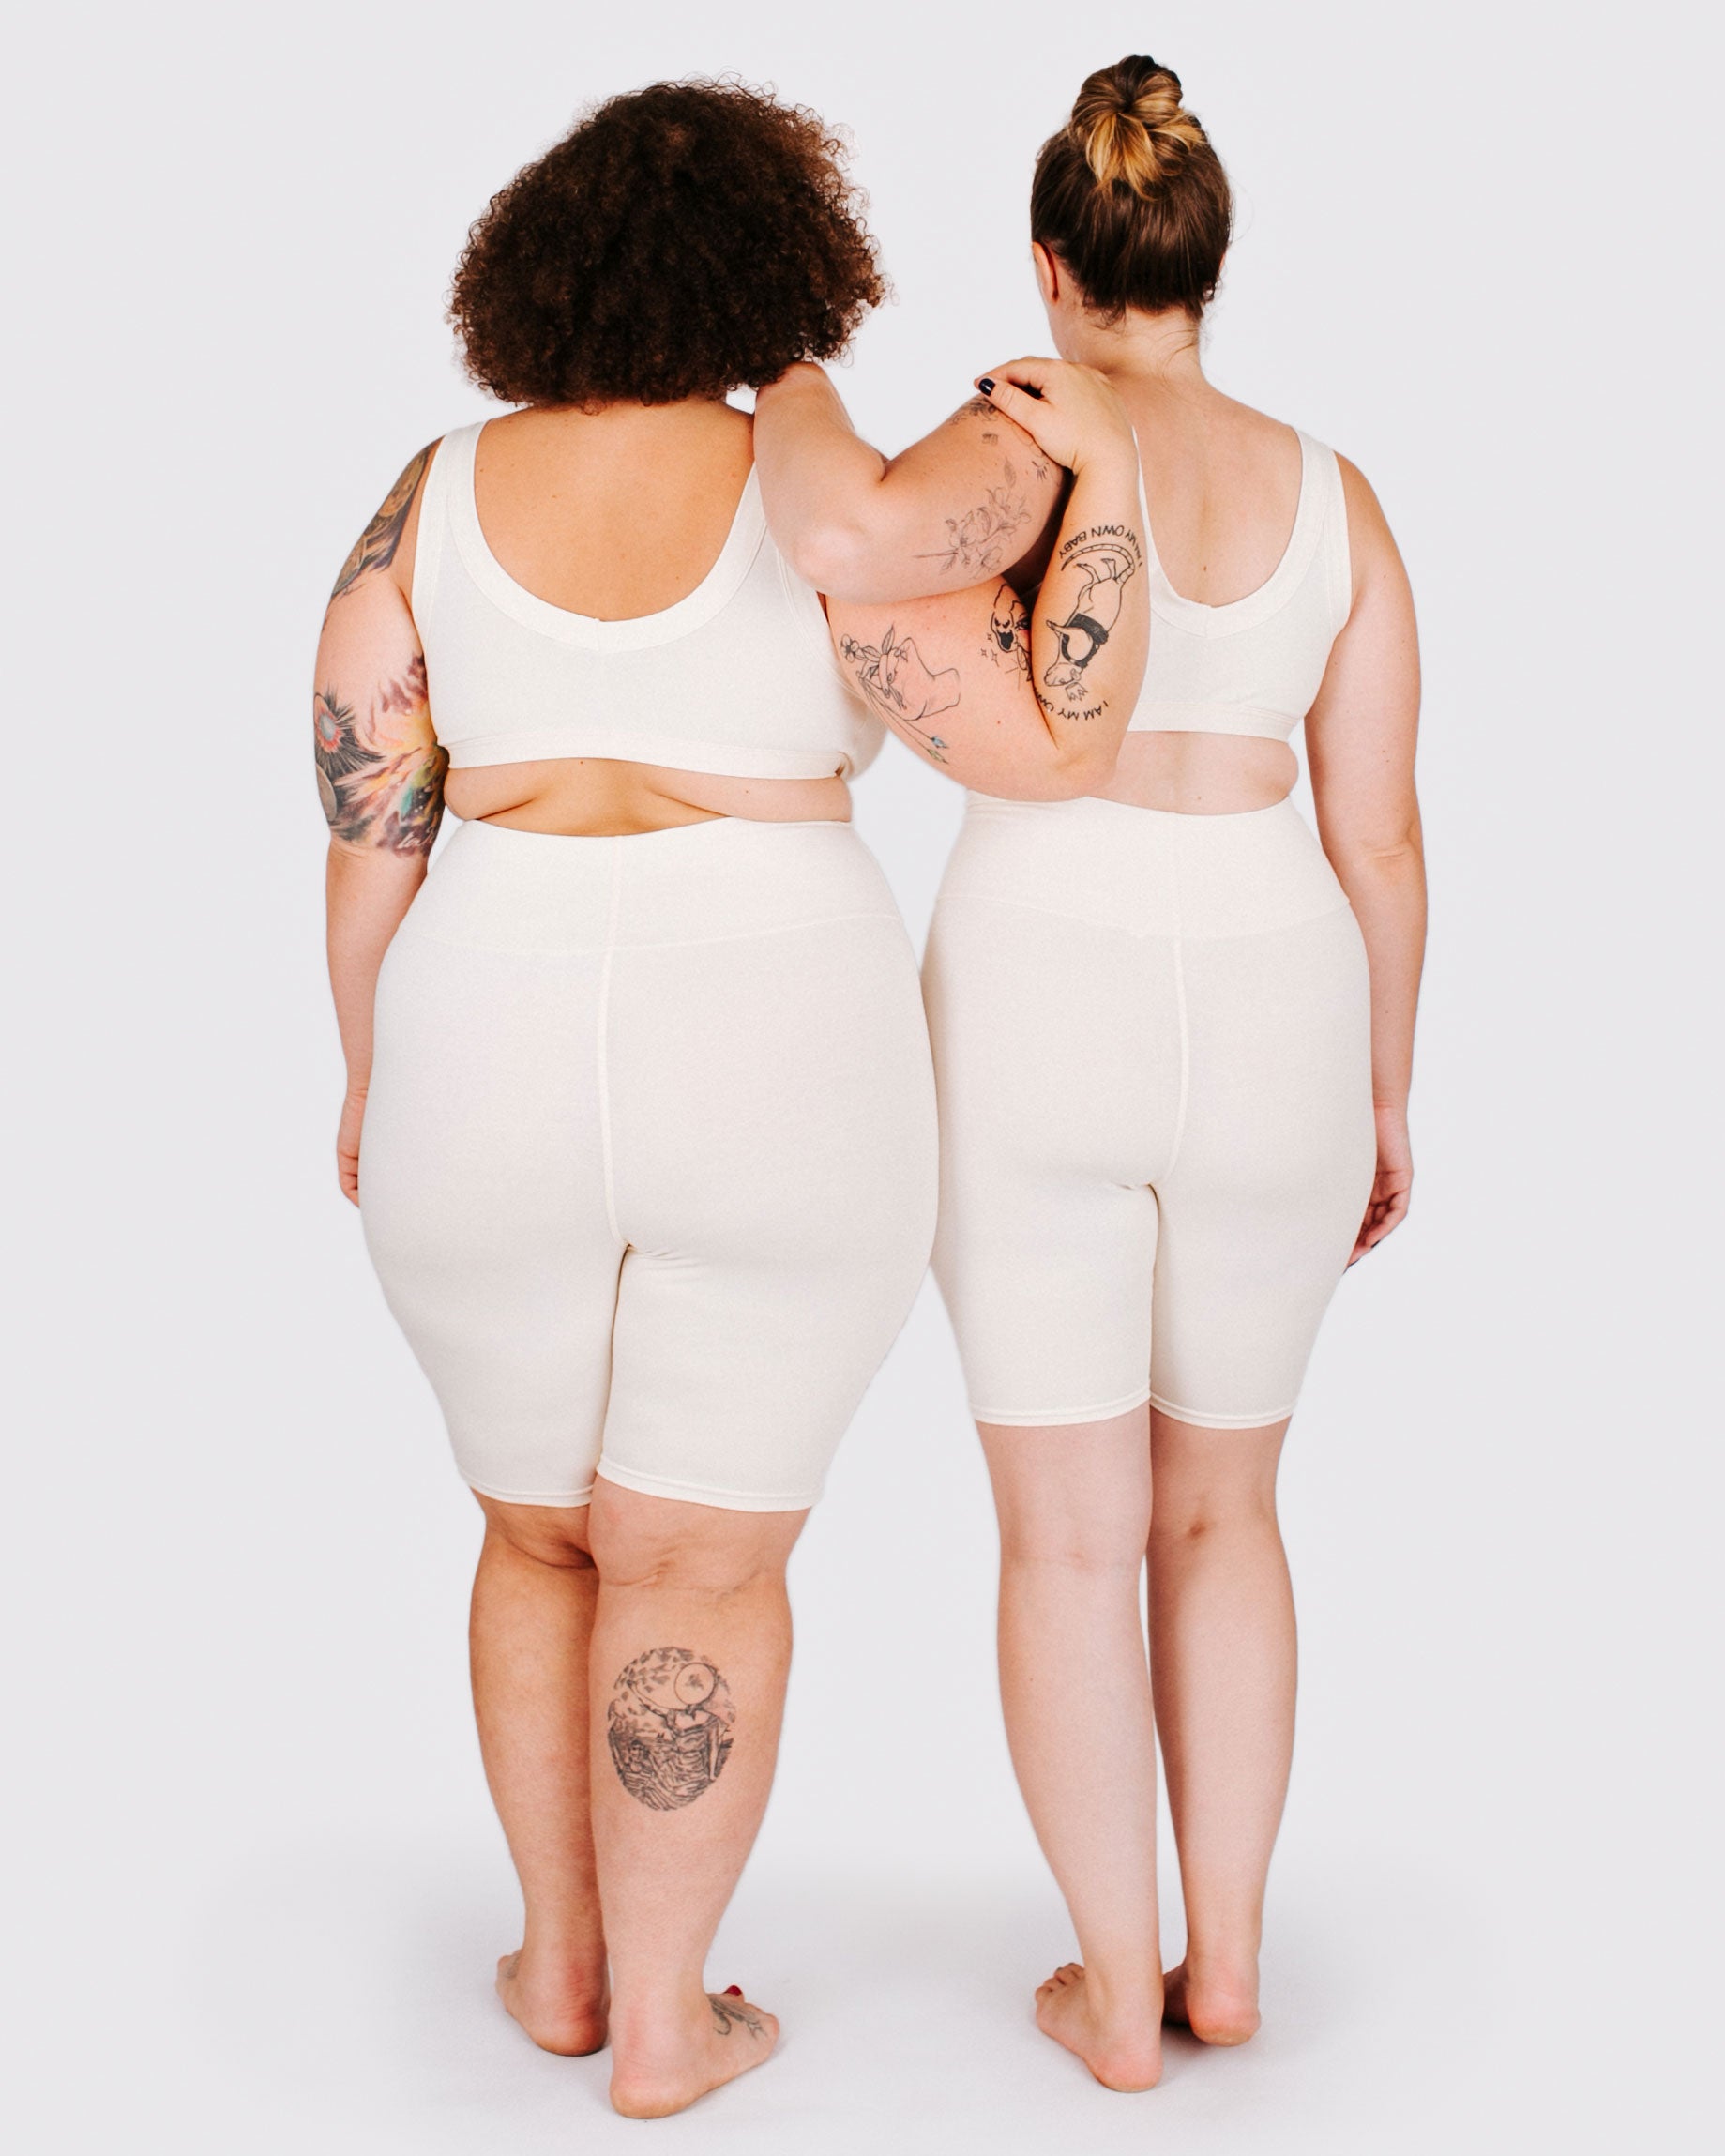 Fit photo from the back of Thunderpants organic cotton Bike Shorts and Bralettes in off-white on two models standing together.